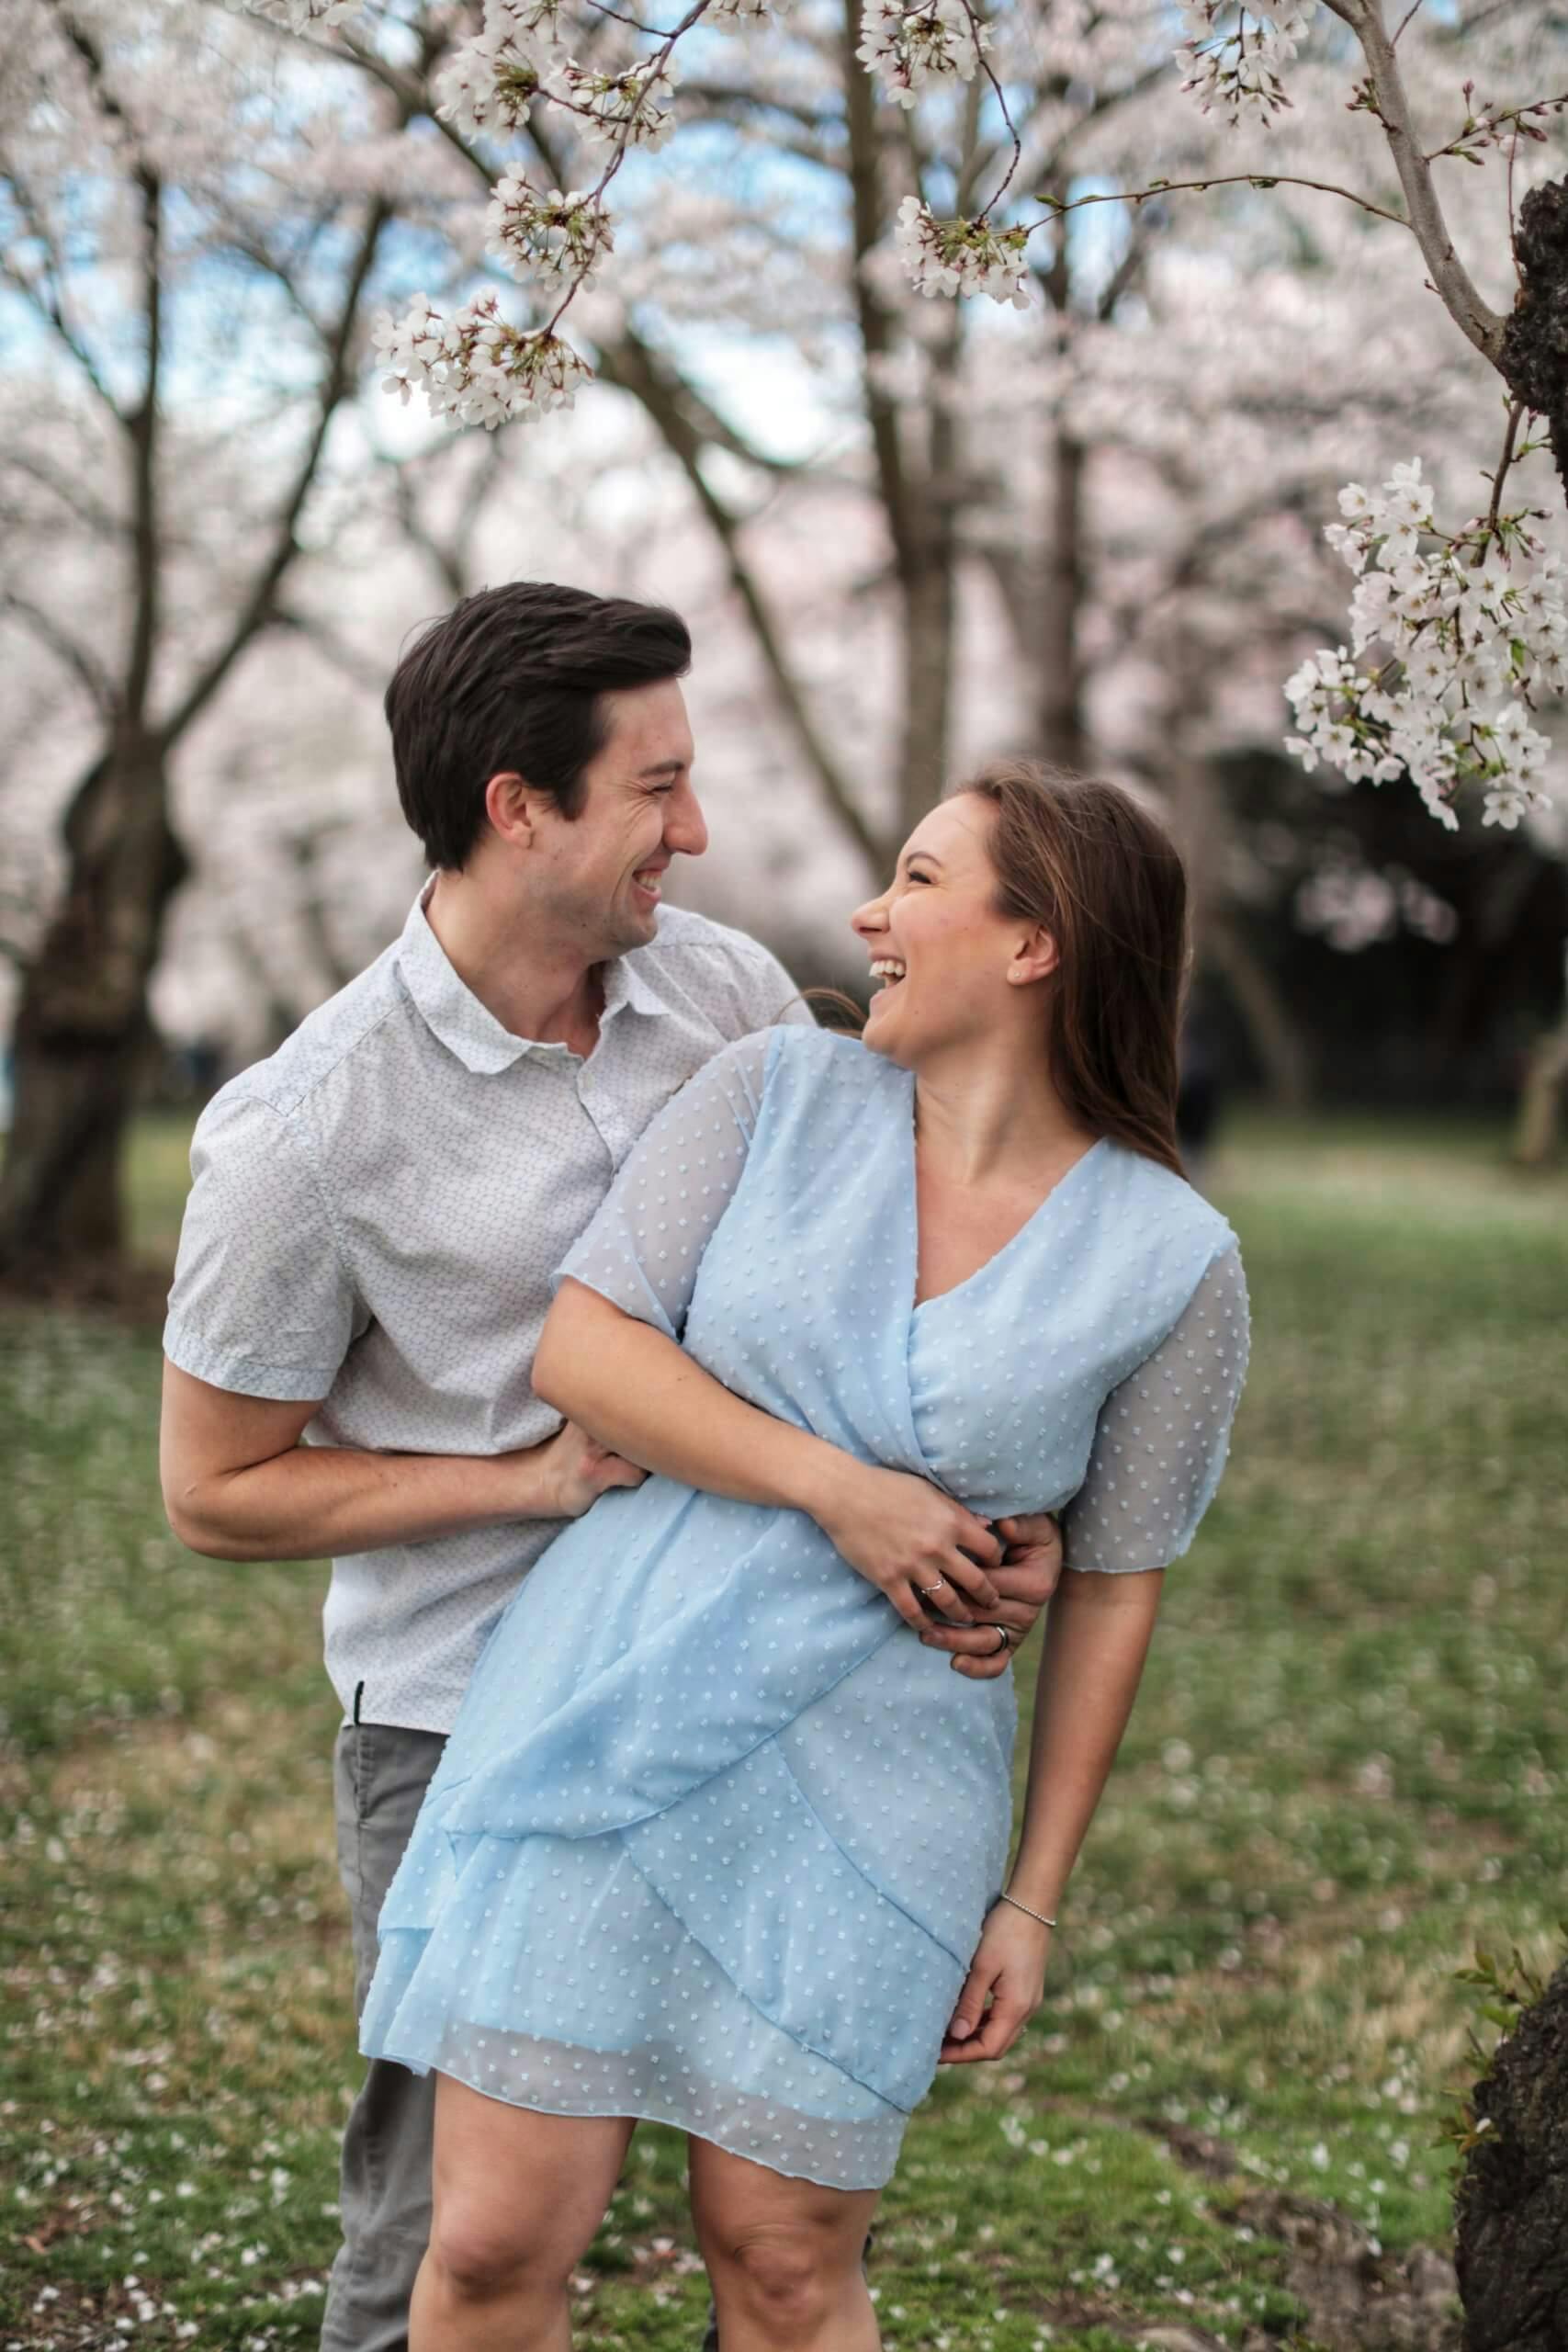 A couple smiling and embracing each other in a field filled with cherry blossoms.